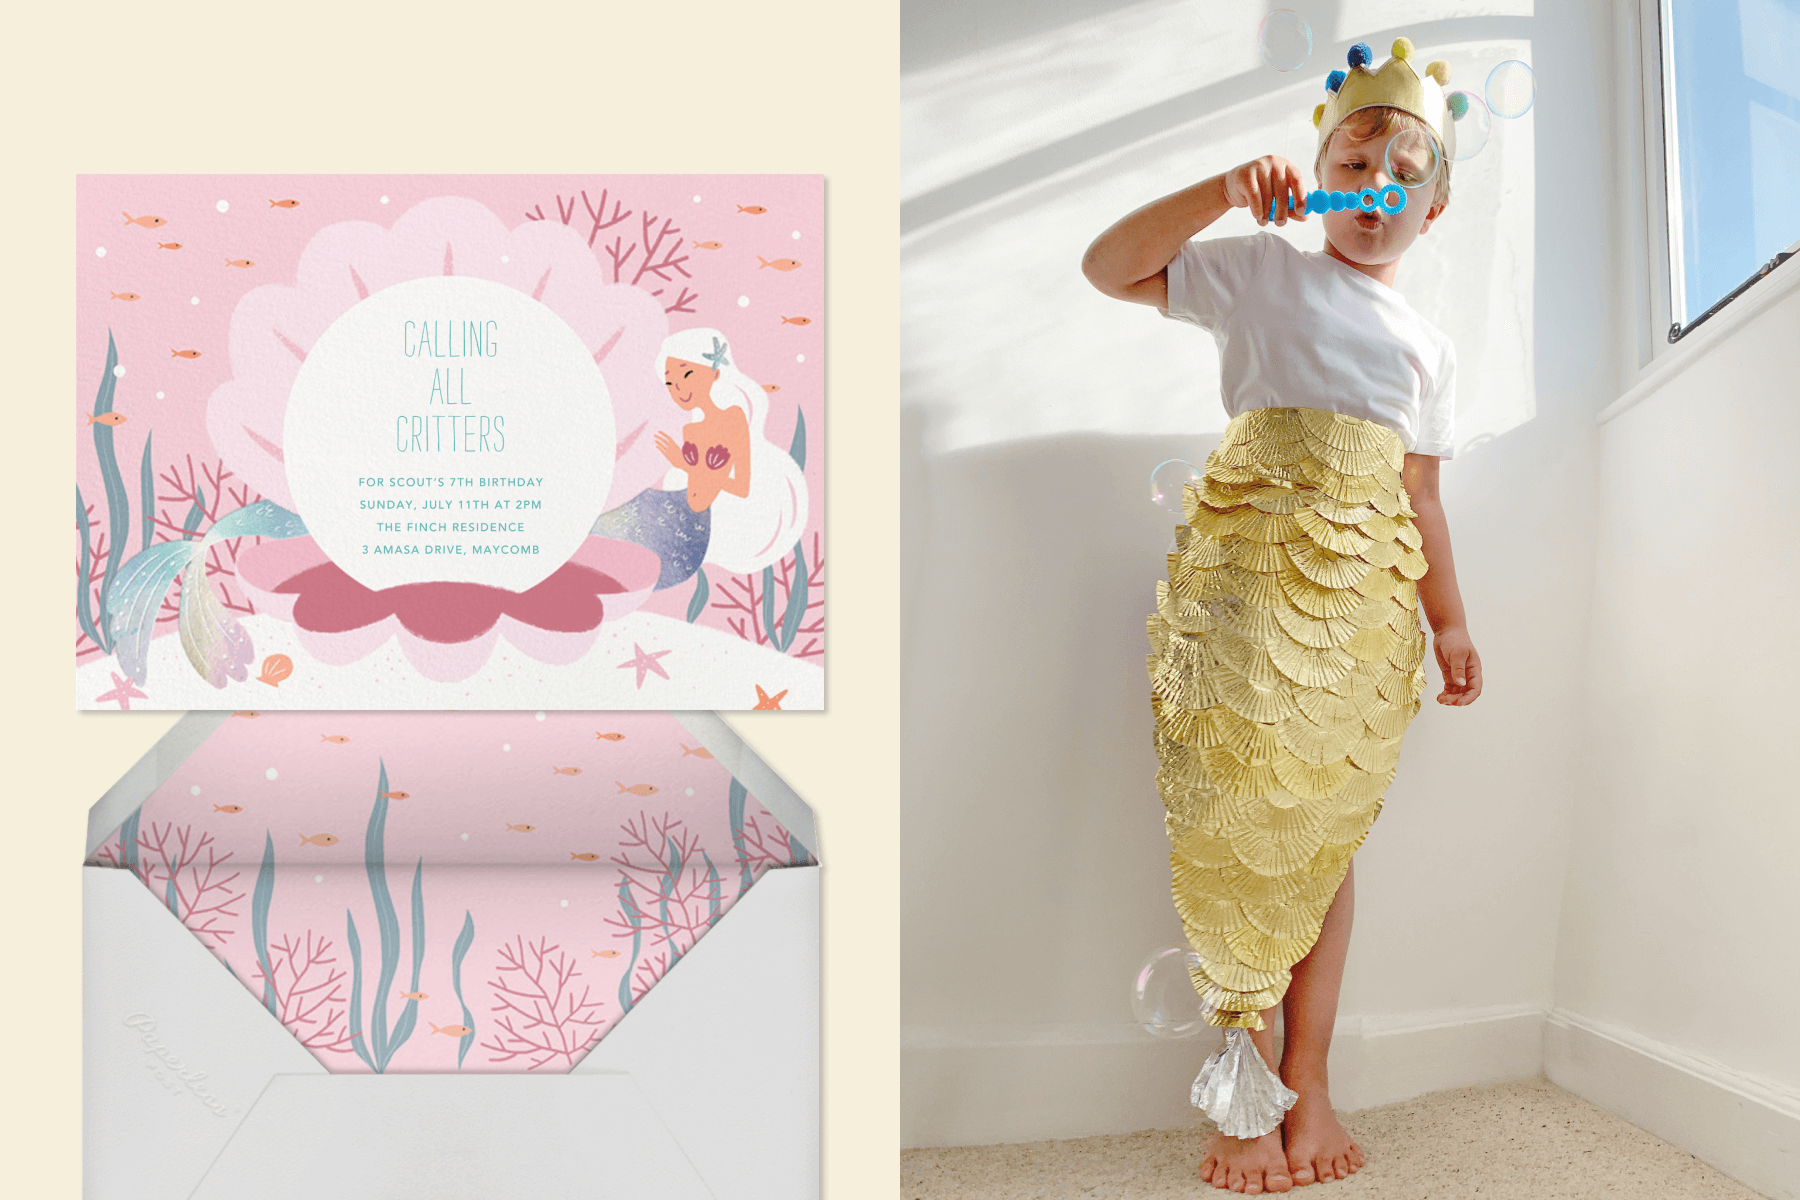 A pink invitation with a mermaid and a large oyster shell with a pearl inside. Right: A child wearing a gold mermaid tail and crown blows bubbles.